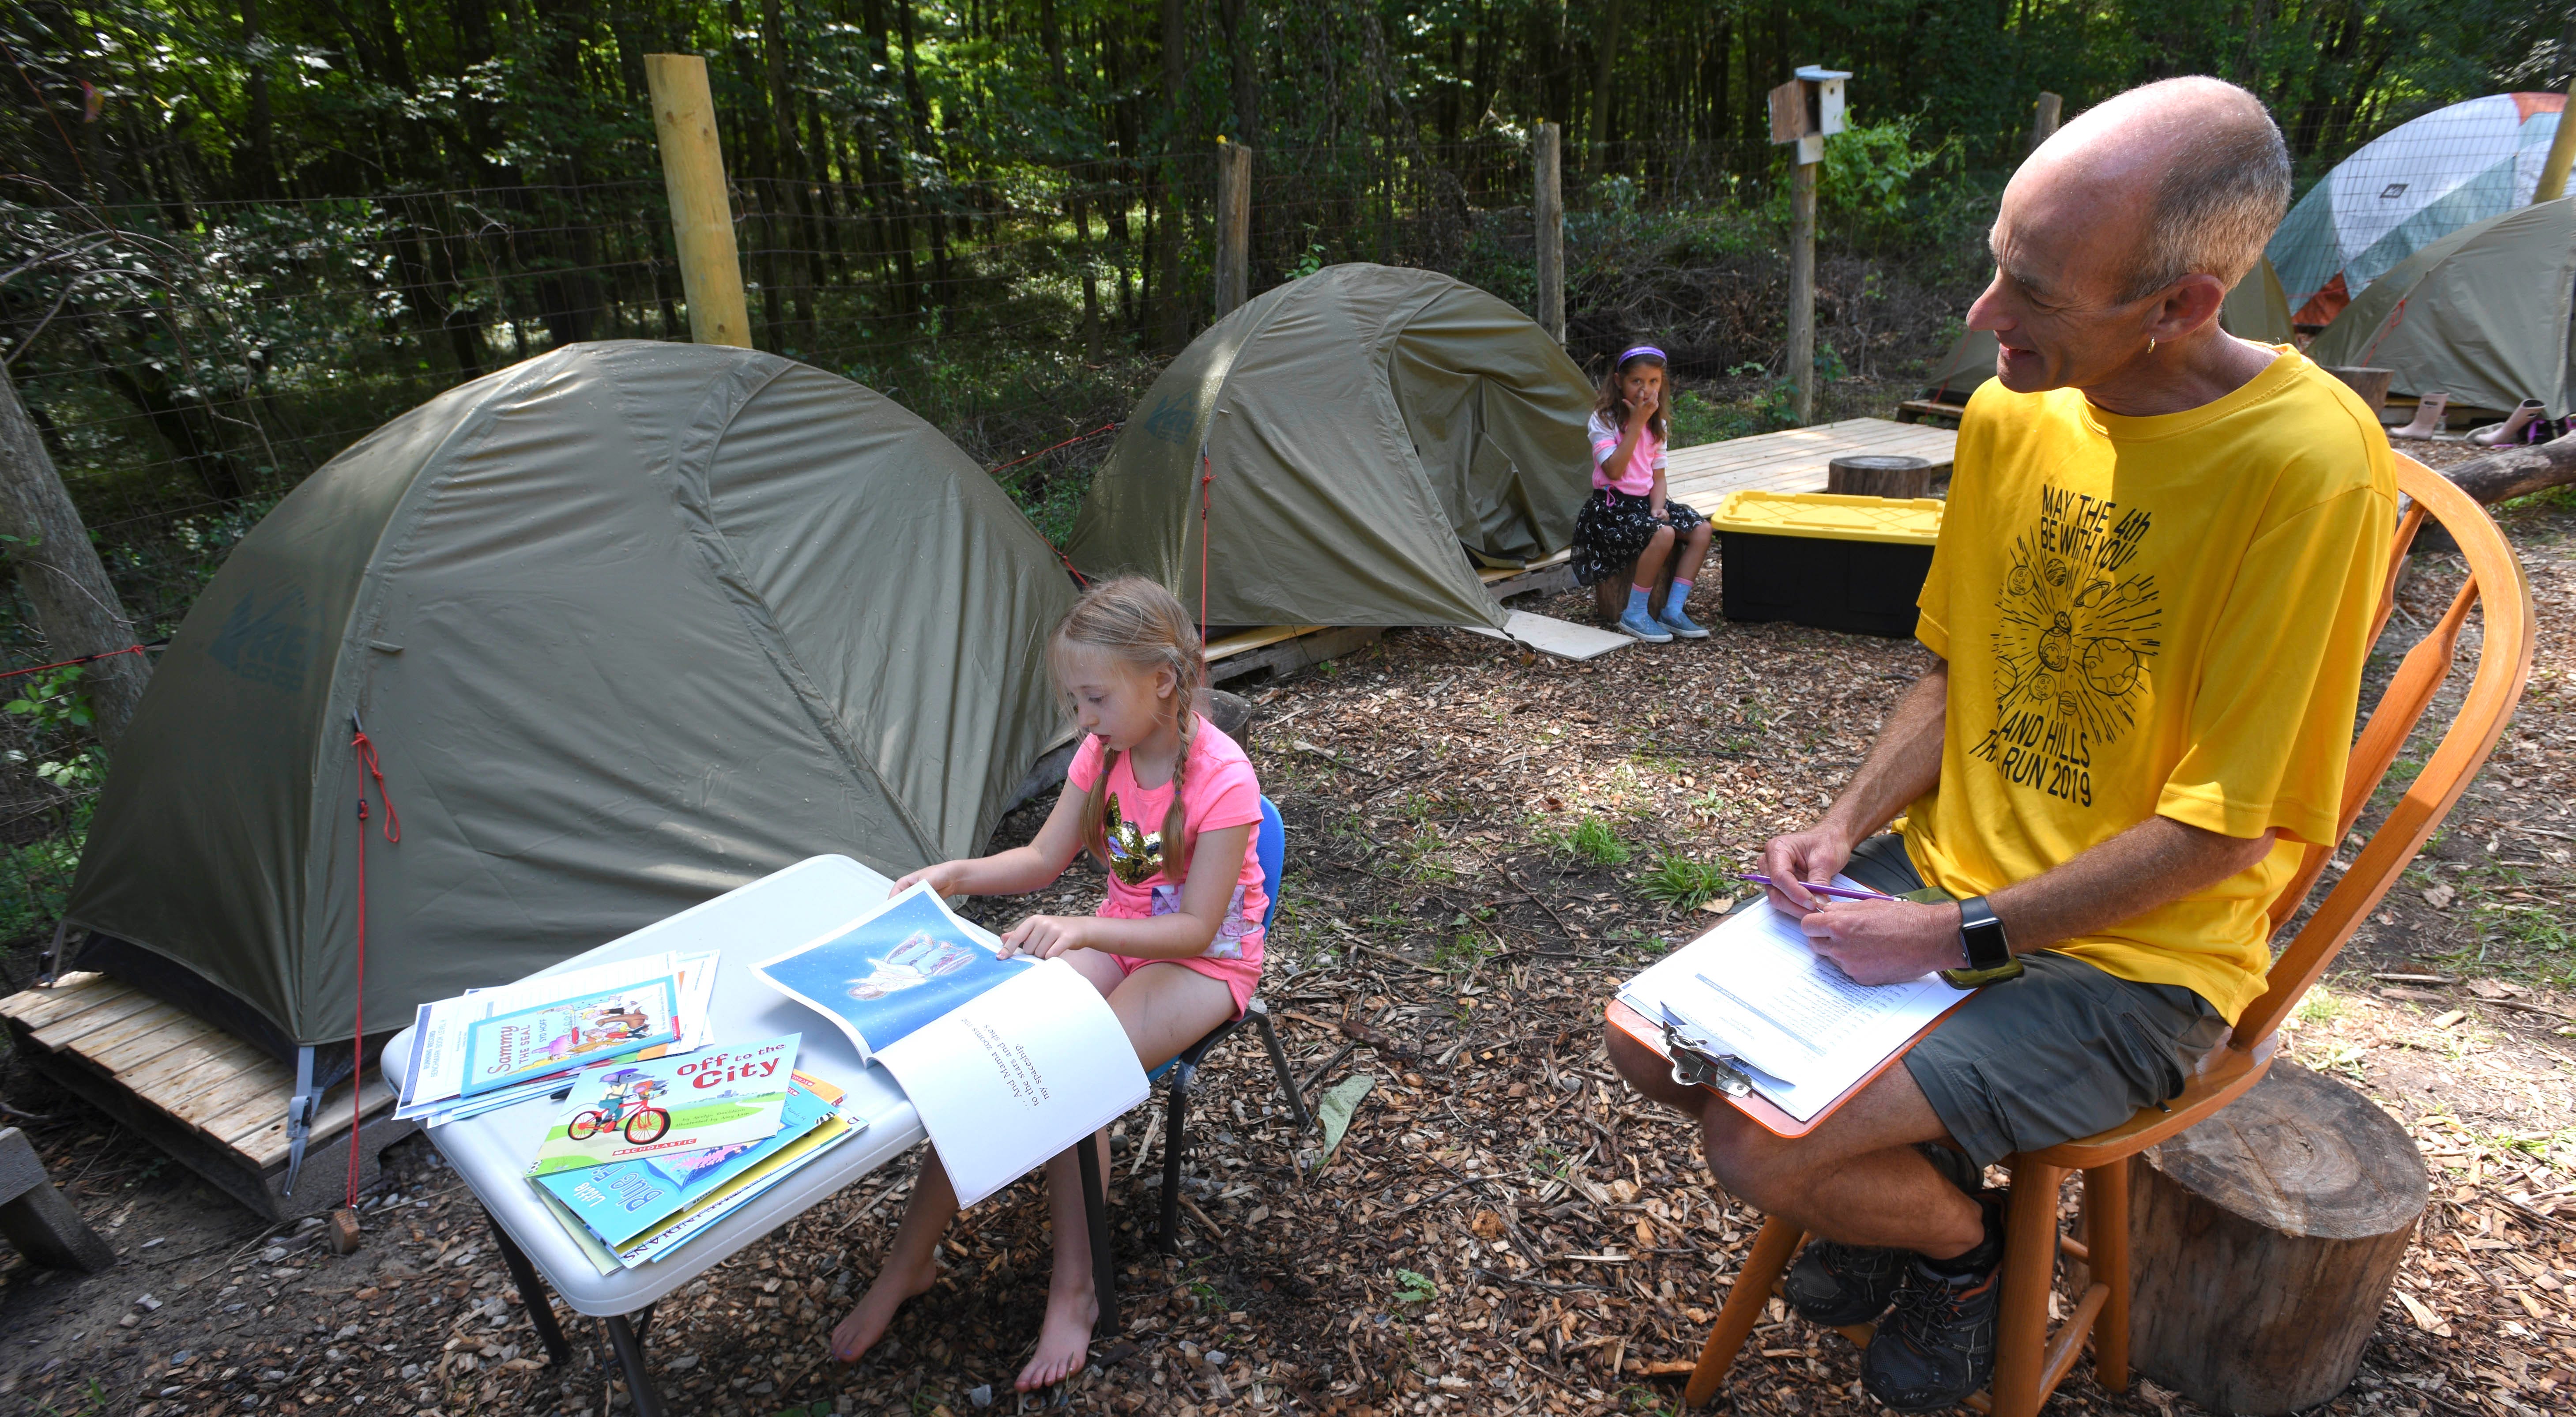 Samantha Young, 7, of Rochester, reads a book as teacher Robert Crowe, of Lake Orion, assesses her reading skills among his classroom, which is a tent encampment.